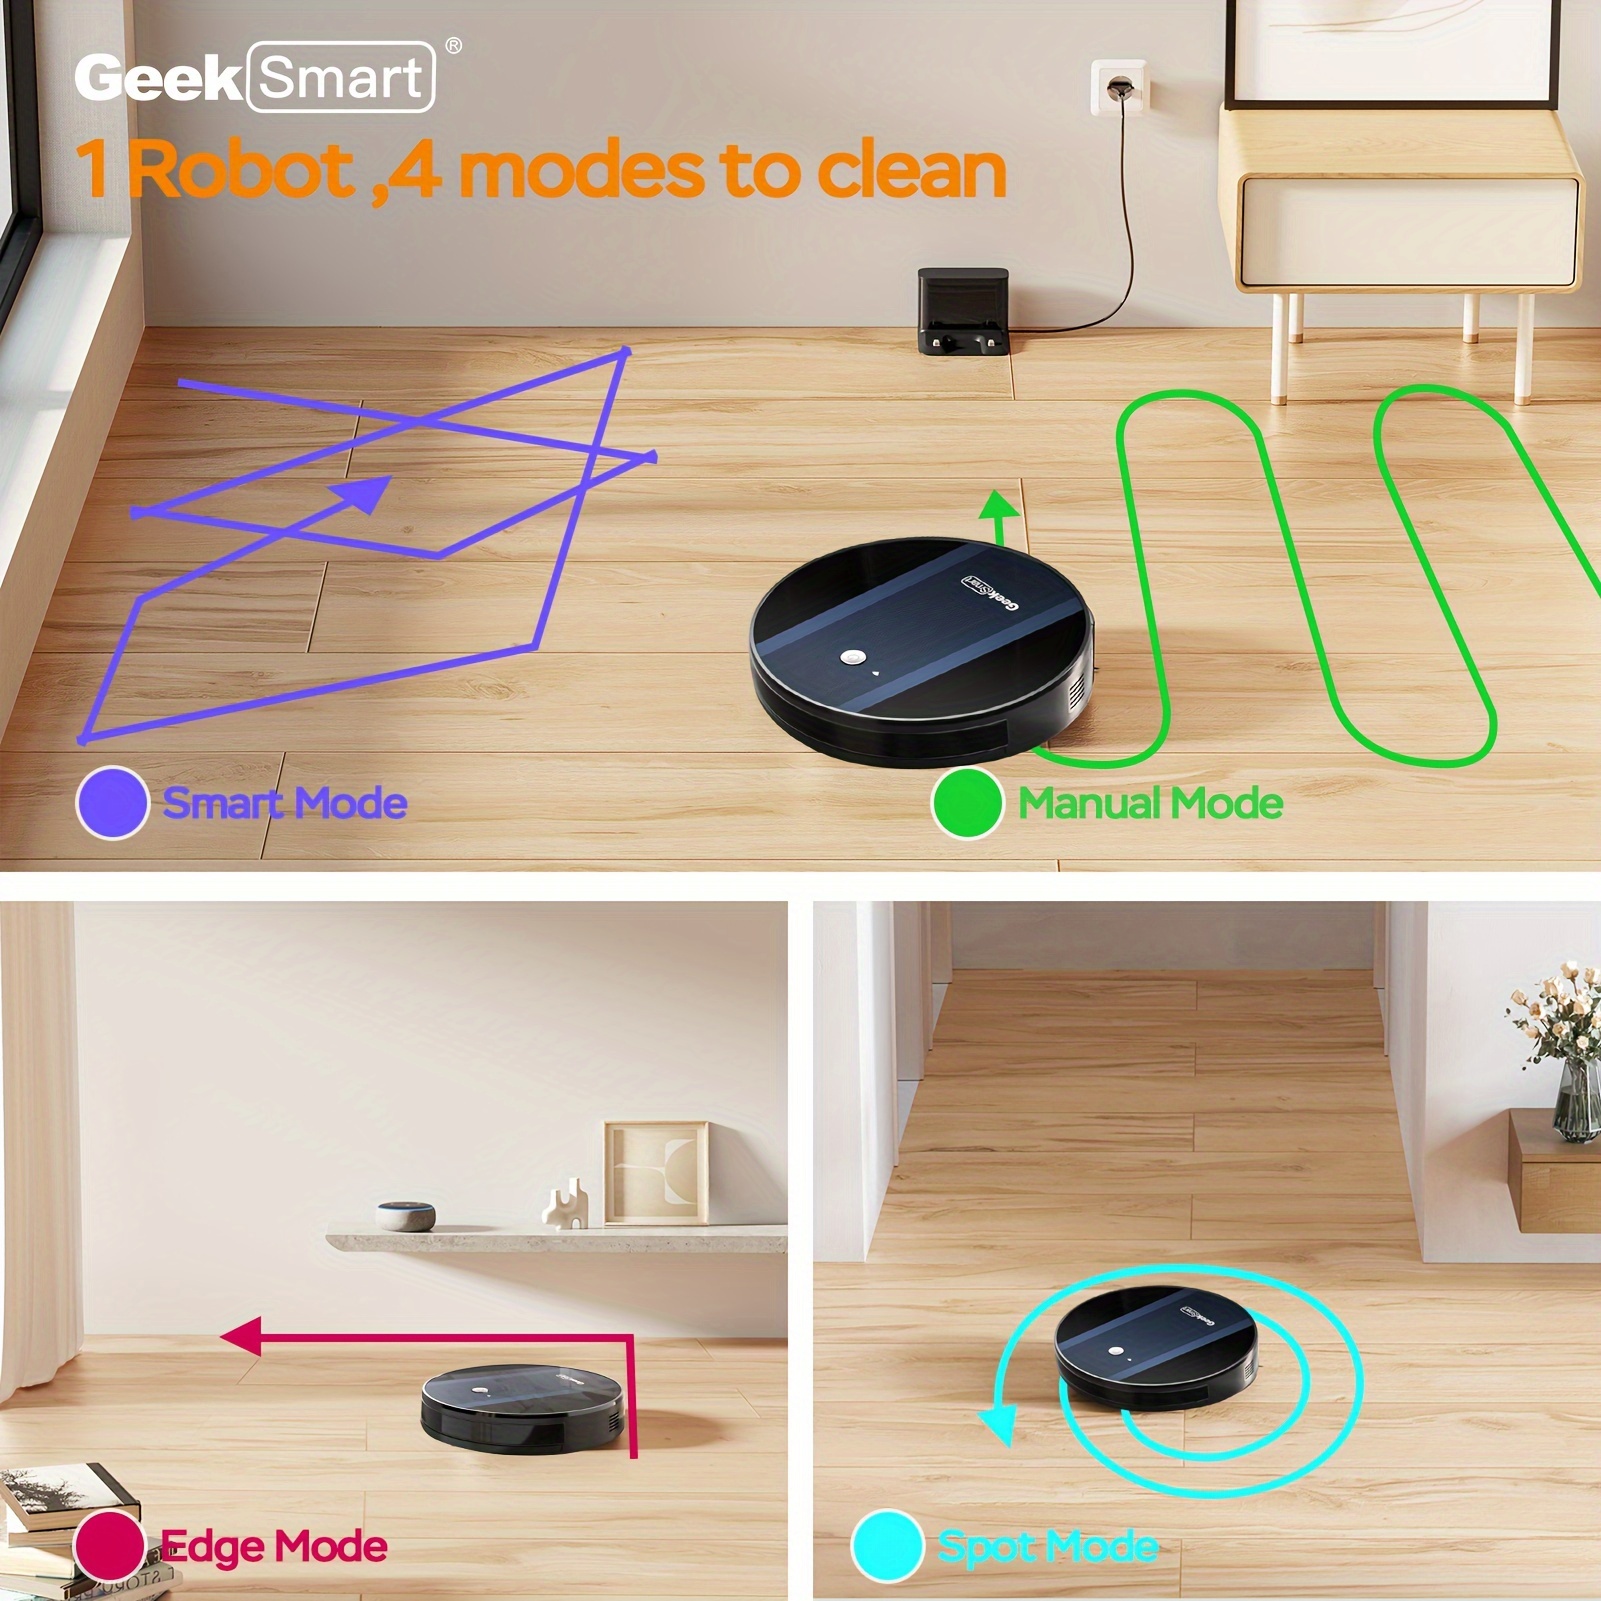 

1pc, Geek Smart G6 Robot Vacuum Cleaner, 1800 Pa Suction, Super-thin, Cleans Hard Floor To Carpet, Wi-fi Connected App, 2600mah 100mins Runtime